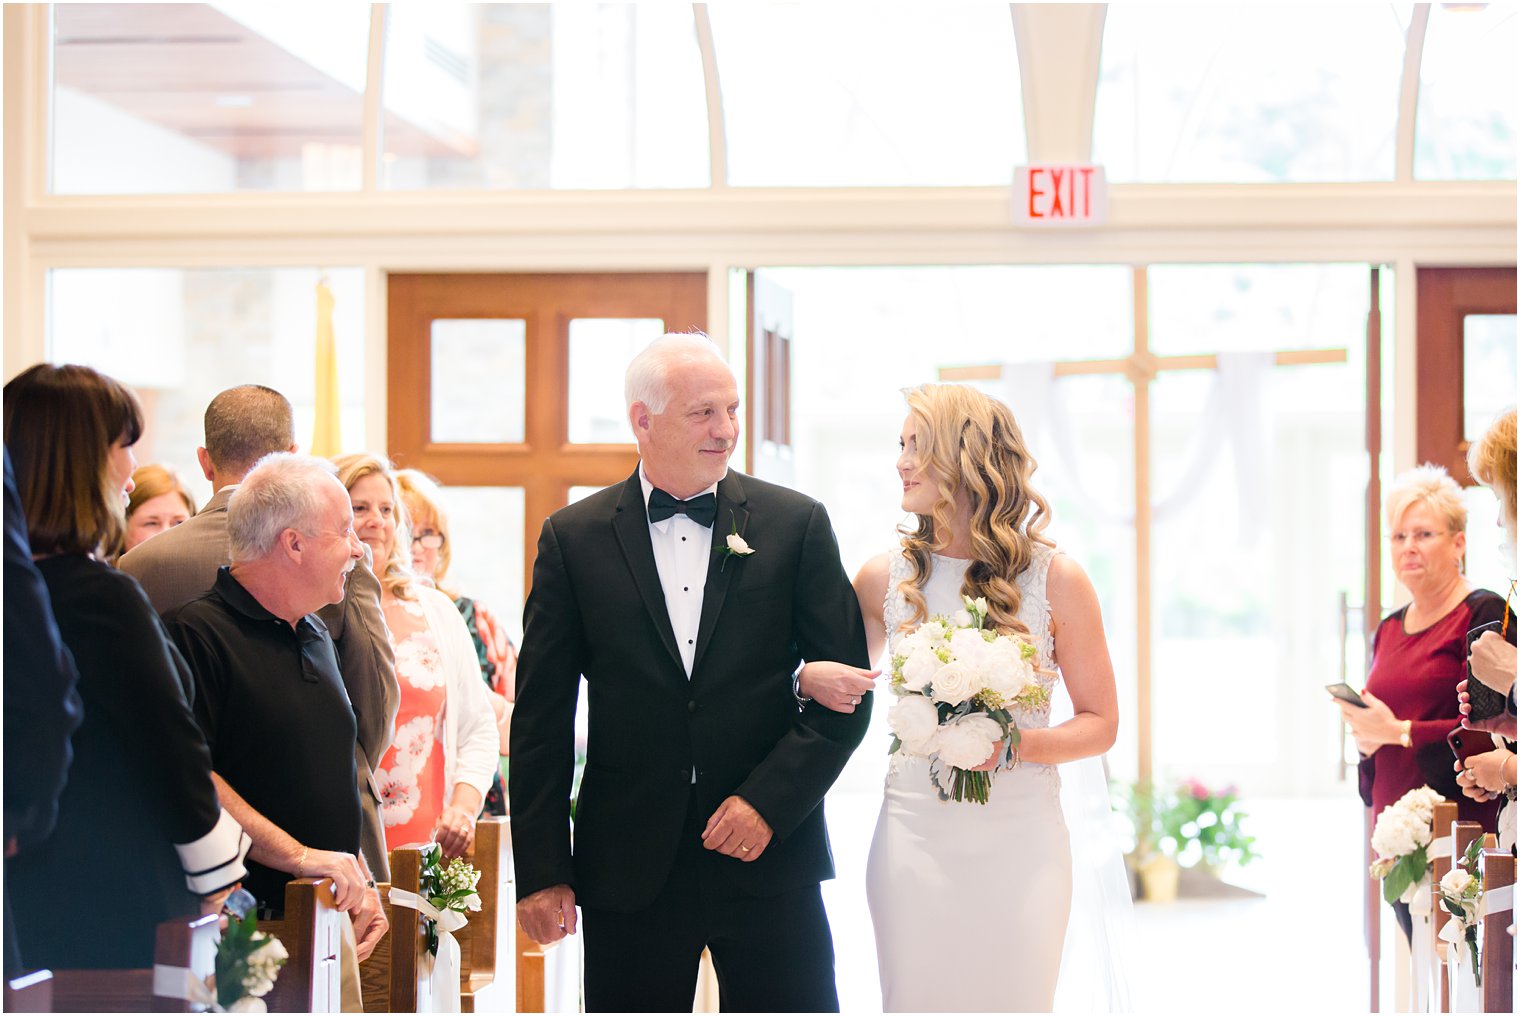 Wedding ceremony at Church of the Presentation in Upper Saddle River